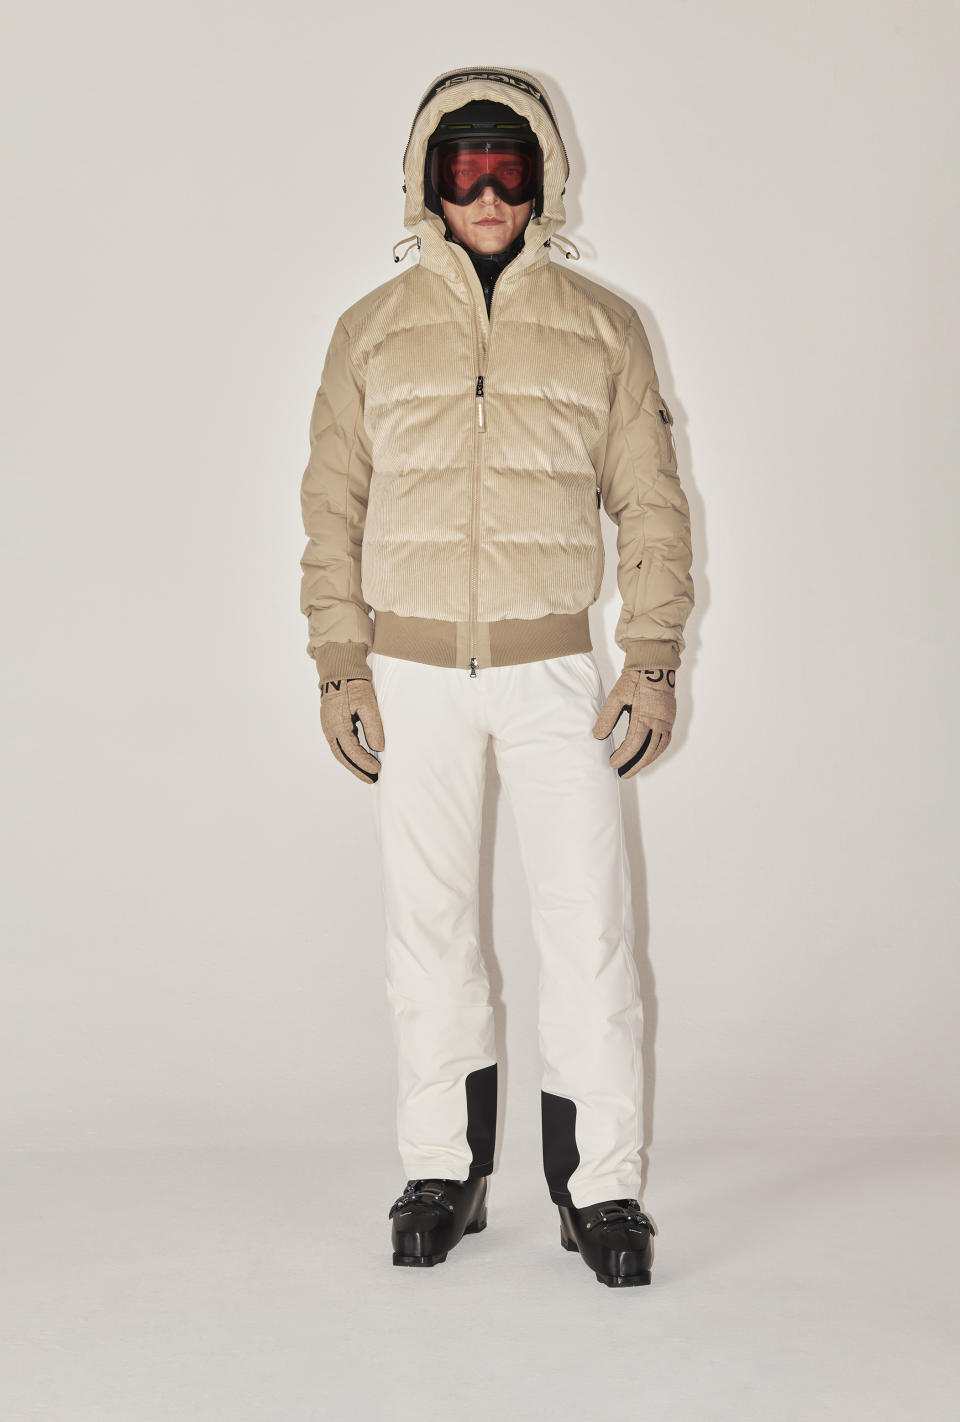 Bogner's fall '24 collection